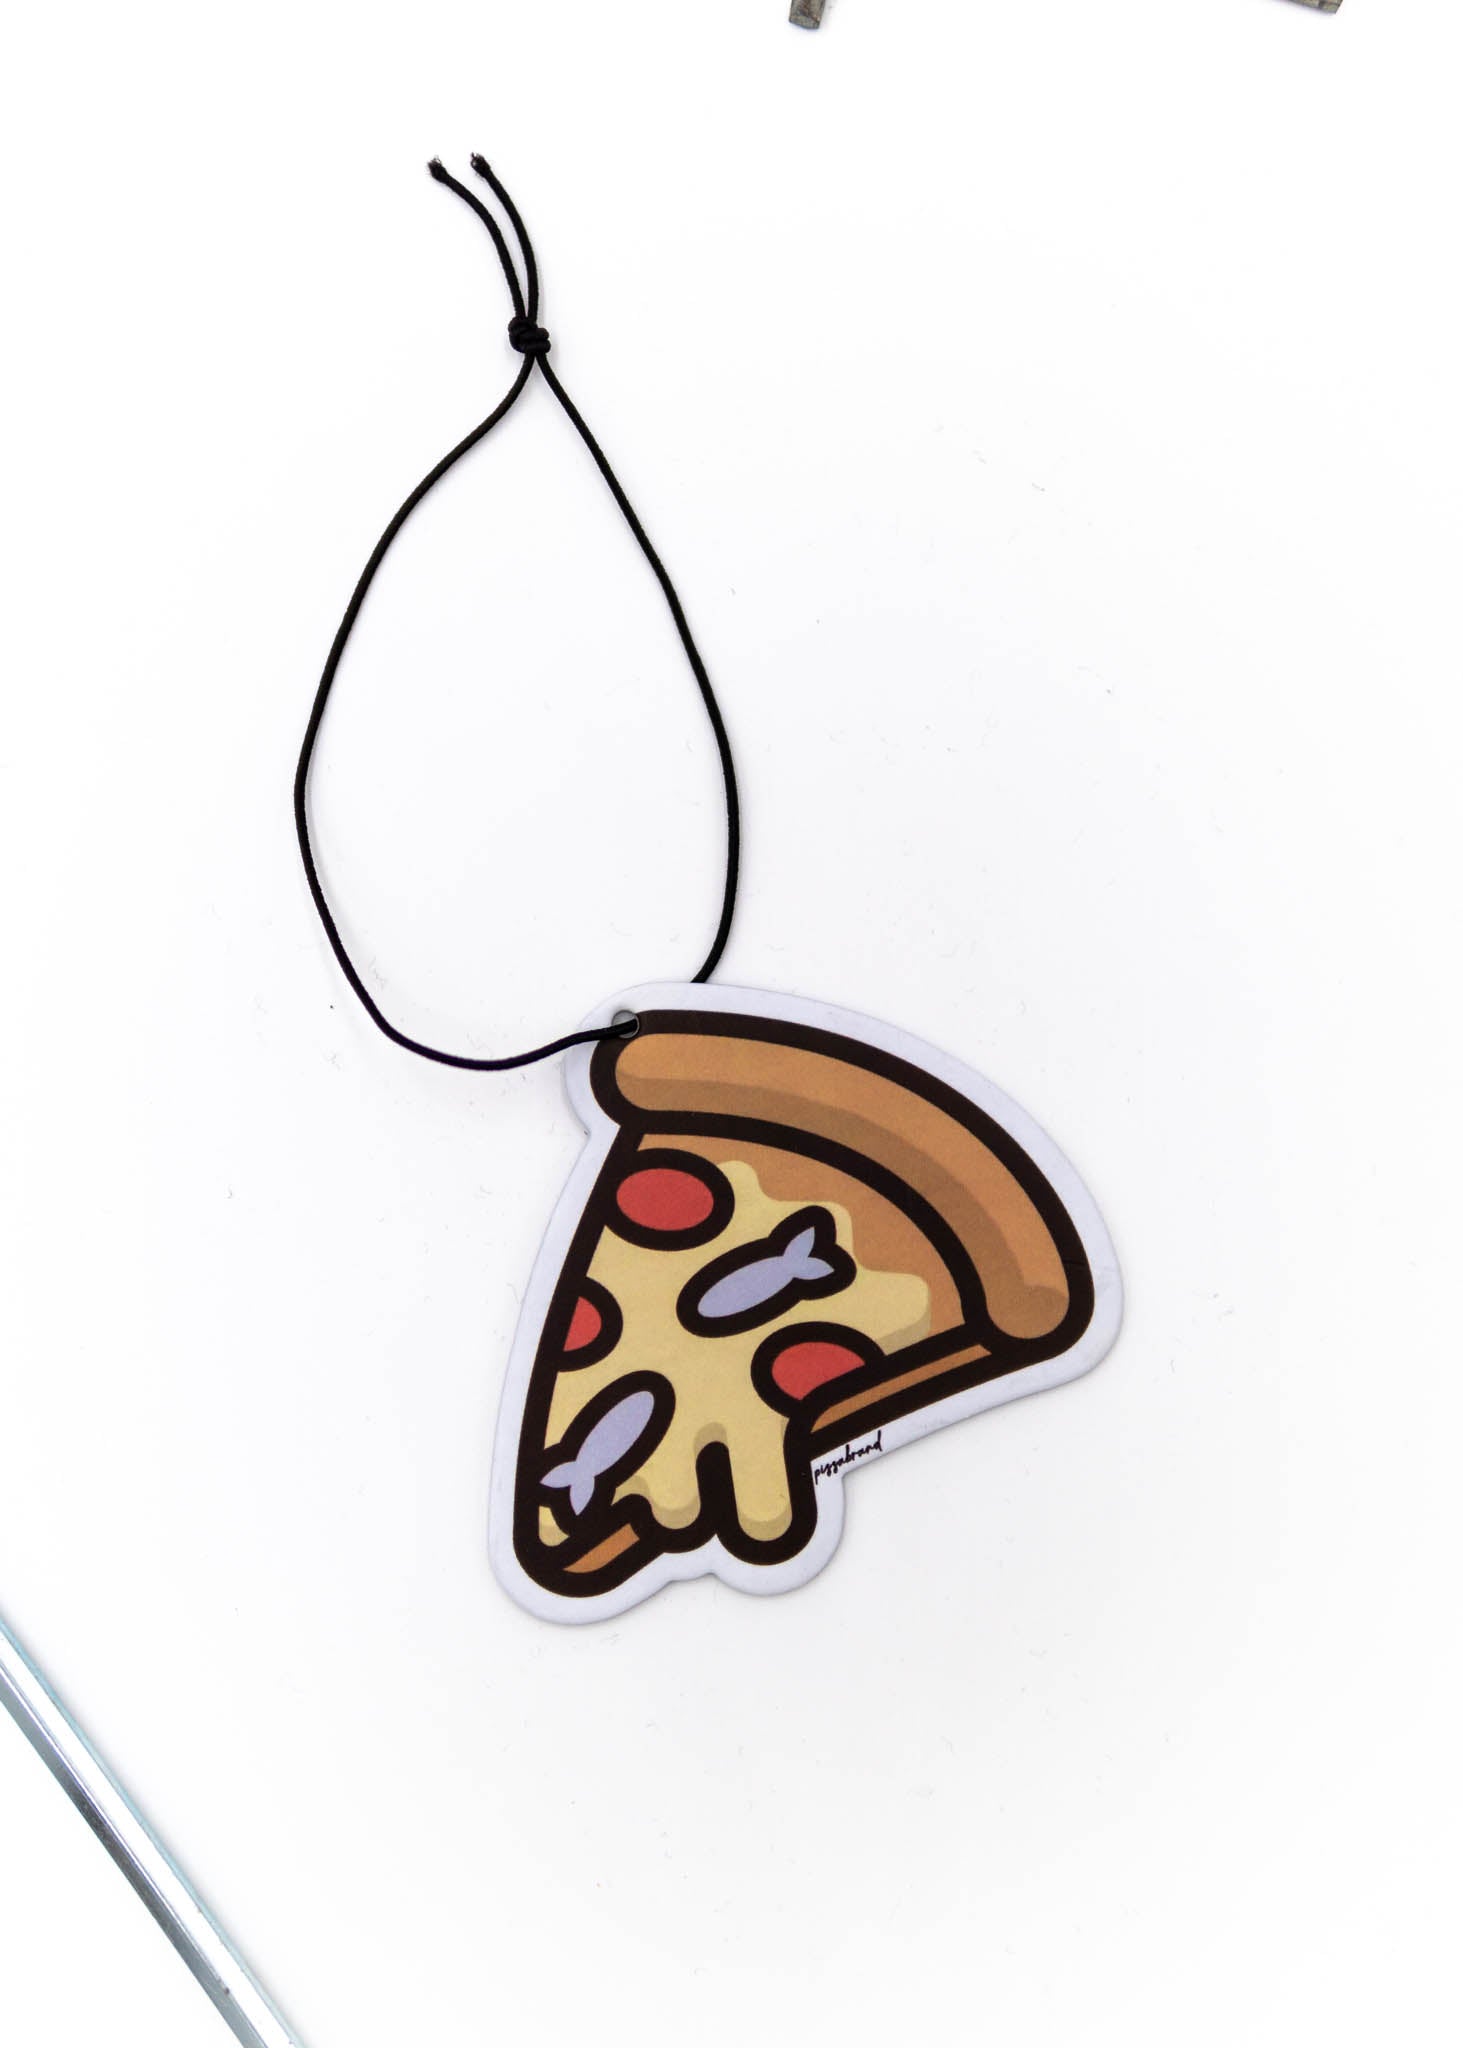 A pizzabrand anchovy and pepperonin air freshener. Photo is a close up of the car air freshener with string.